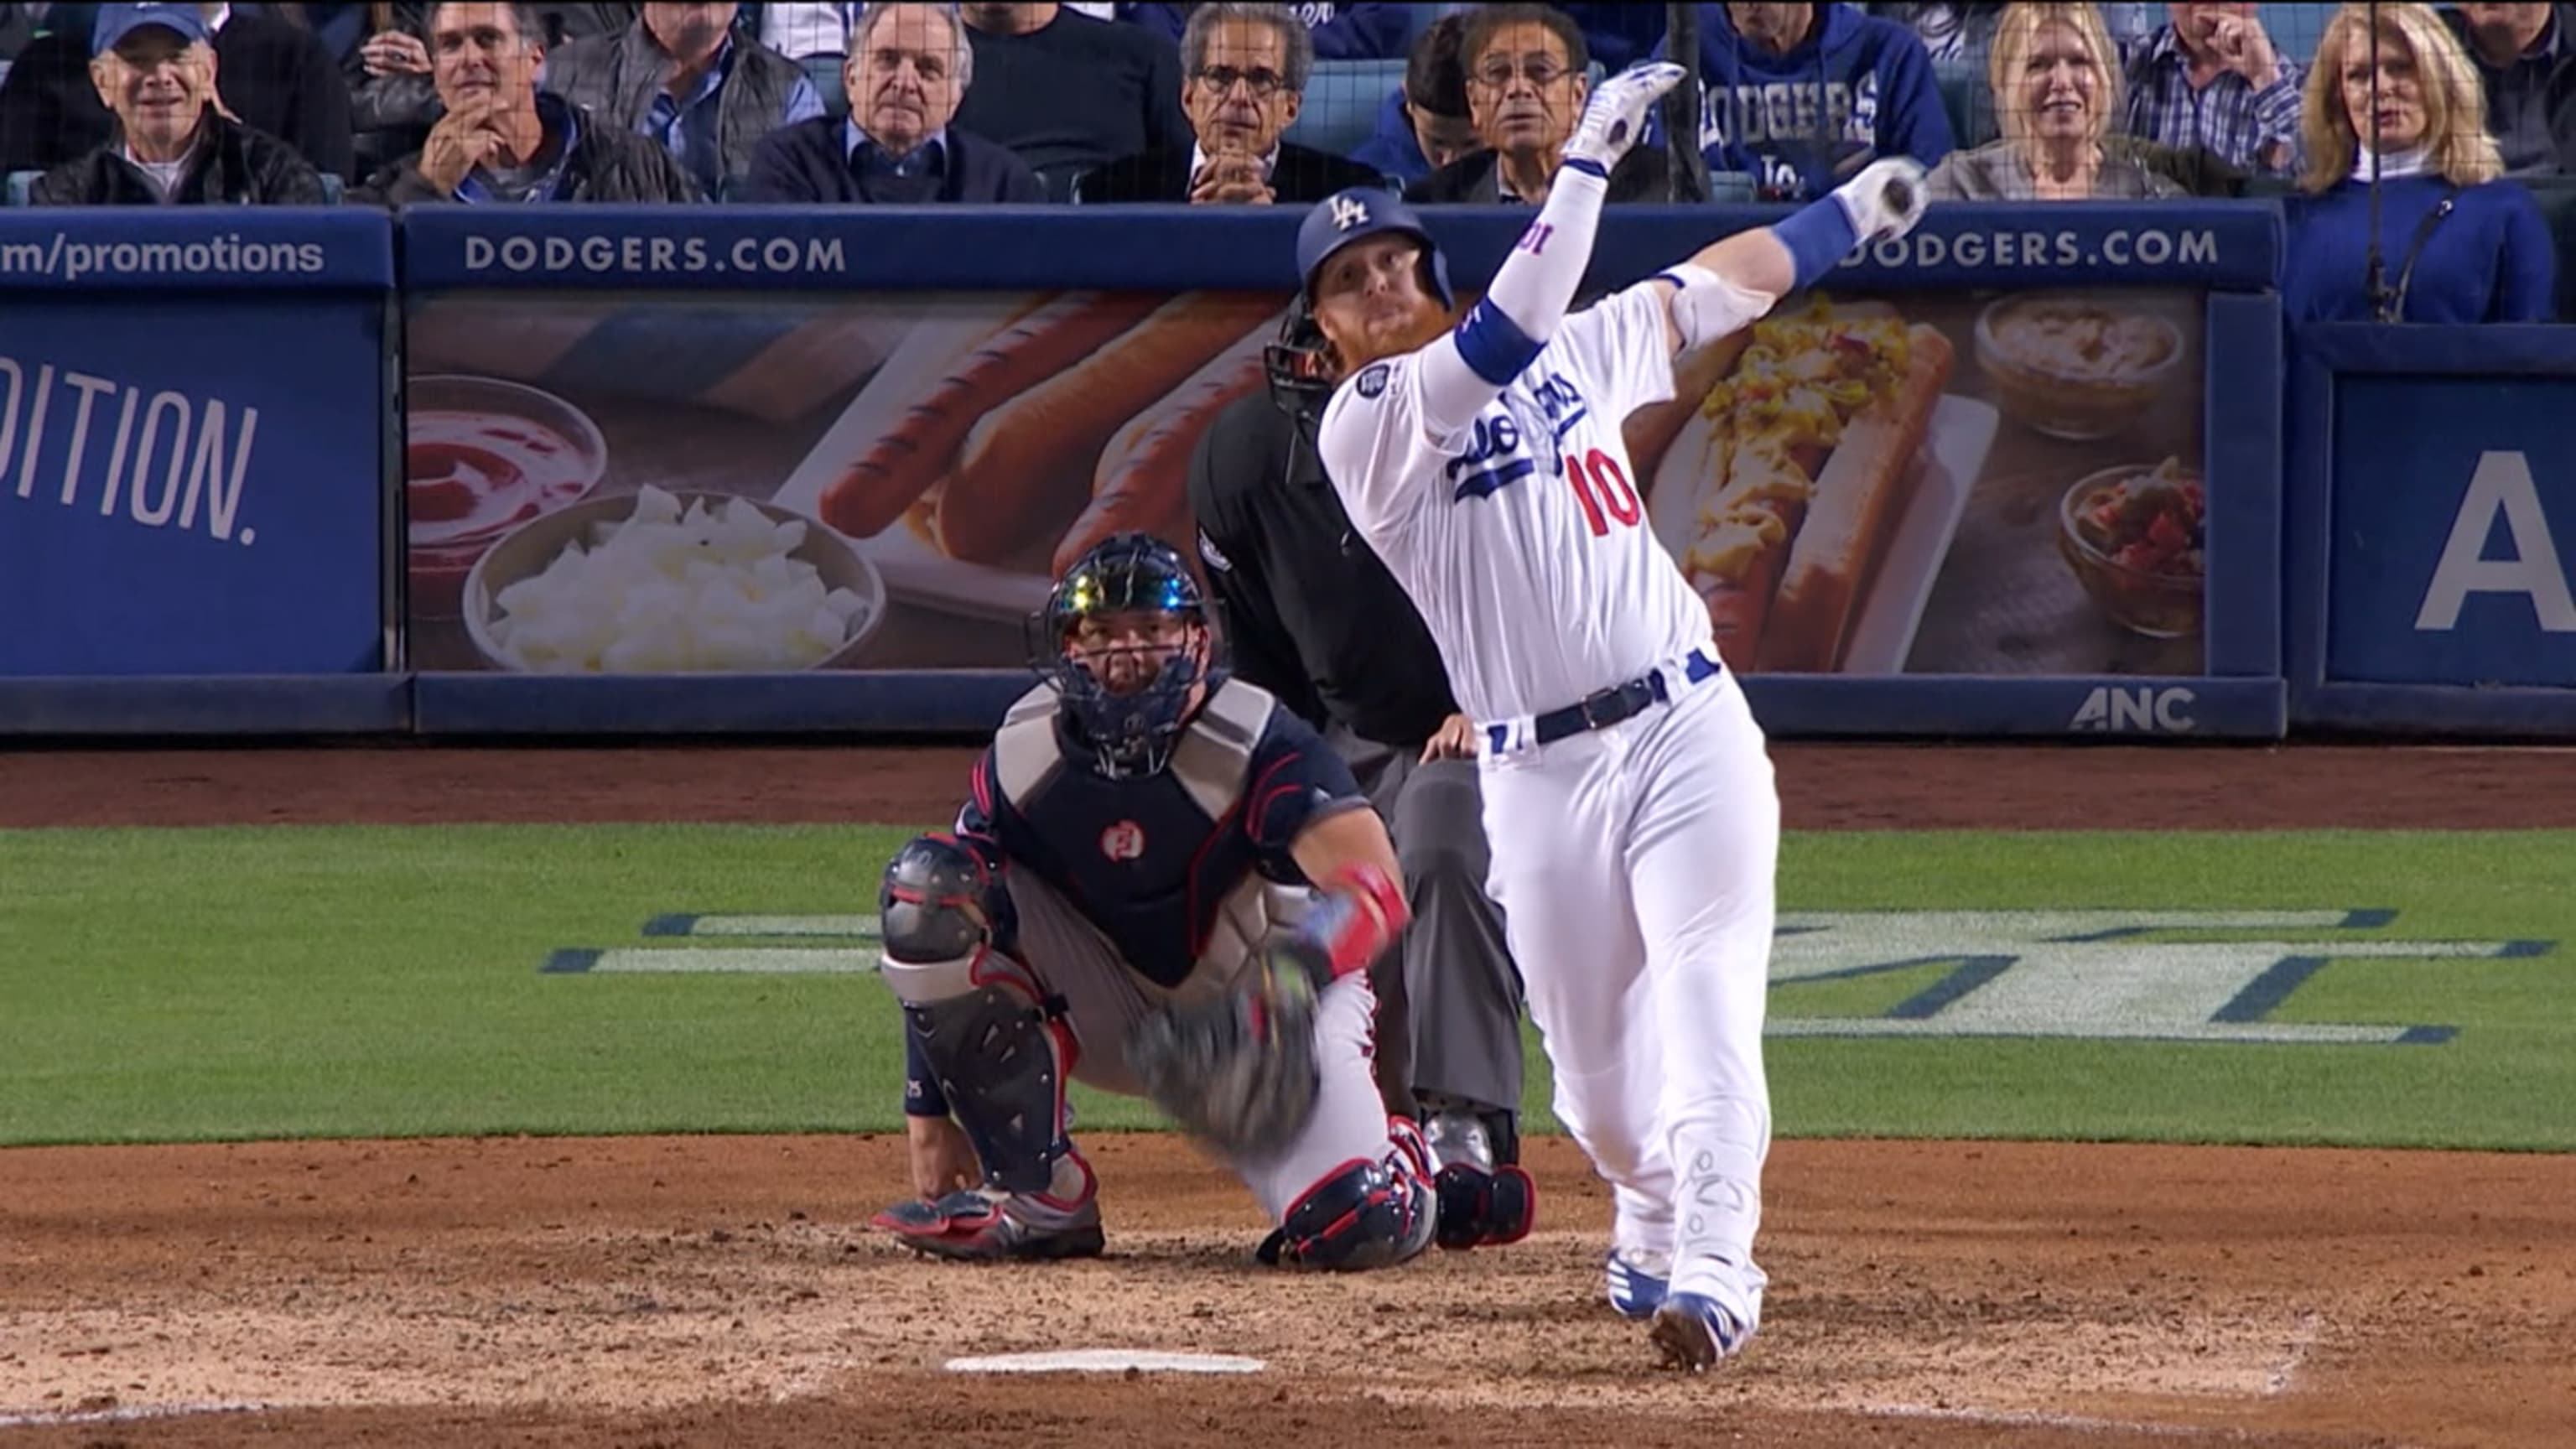 Justin Turner's 3-run home run set tone for Dodgers in NLDS